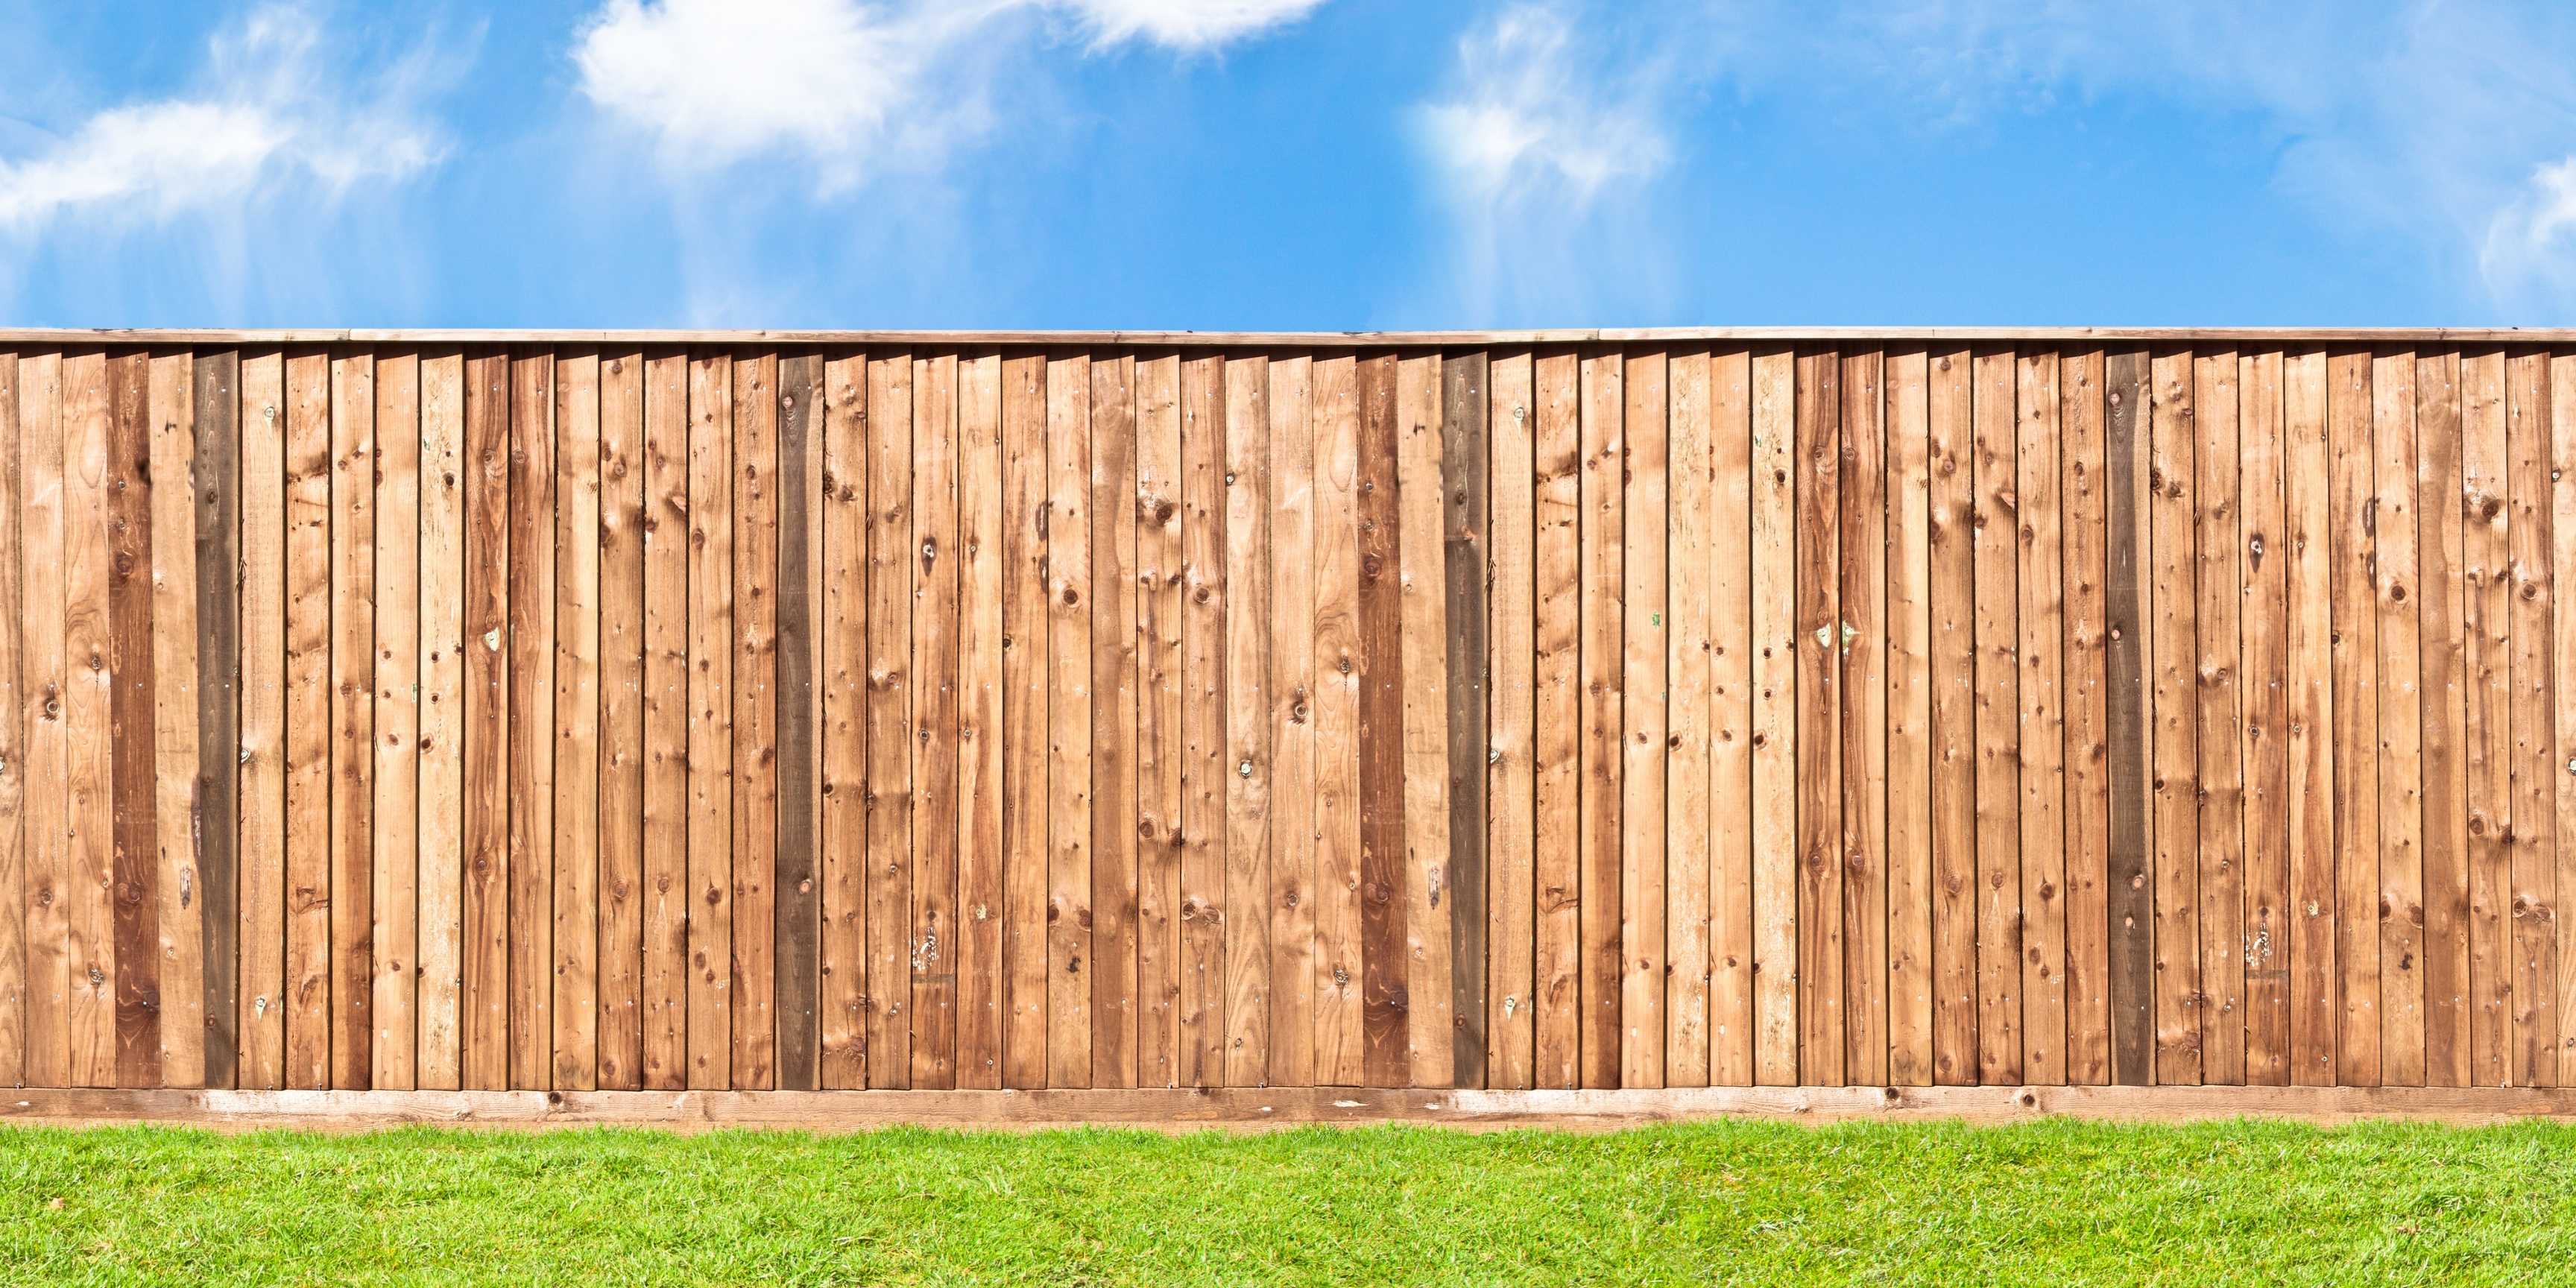 How To Paint A Wooden Fence